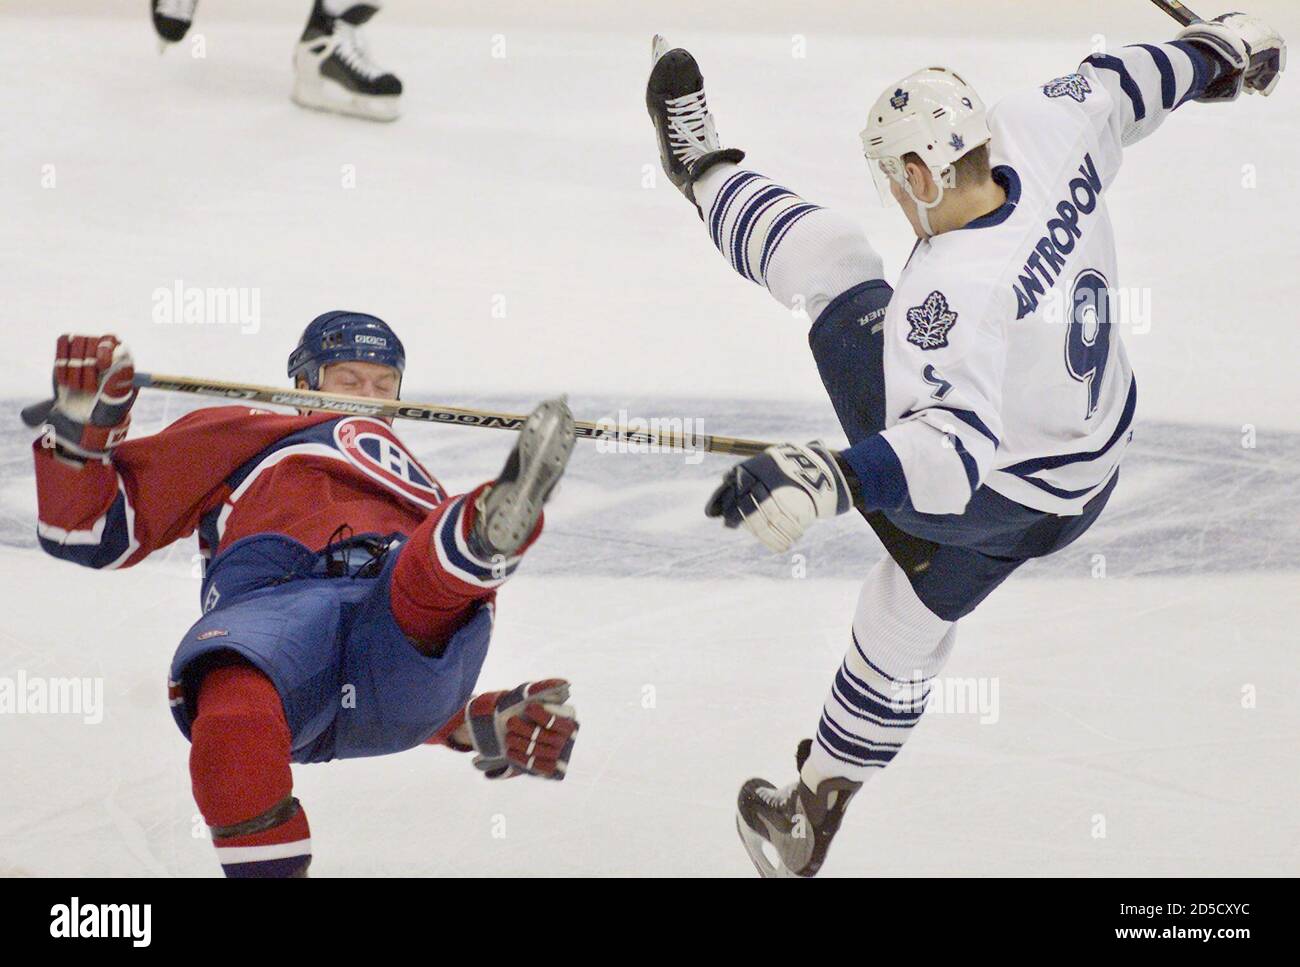 Toronto Maple Leafs center Nik Antropov (R) collides with Montreal  Canadiens center Patrick Poulin during first